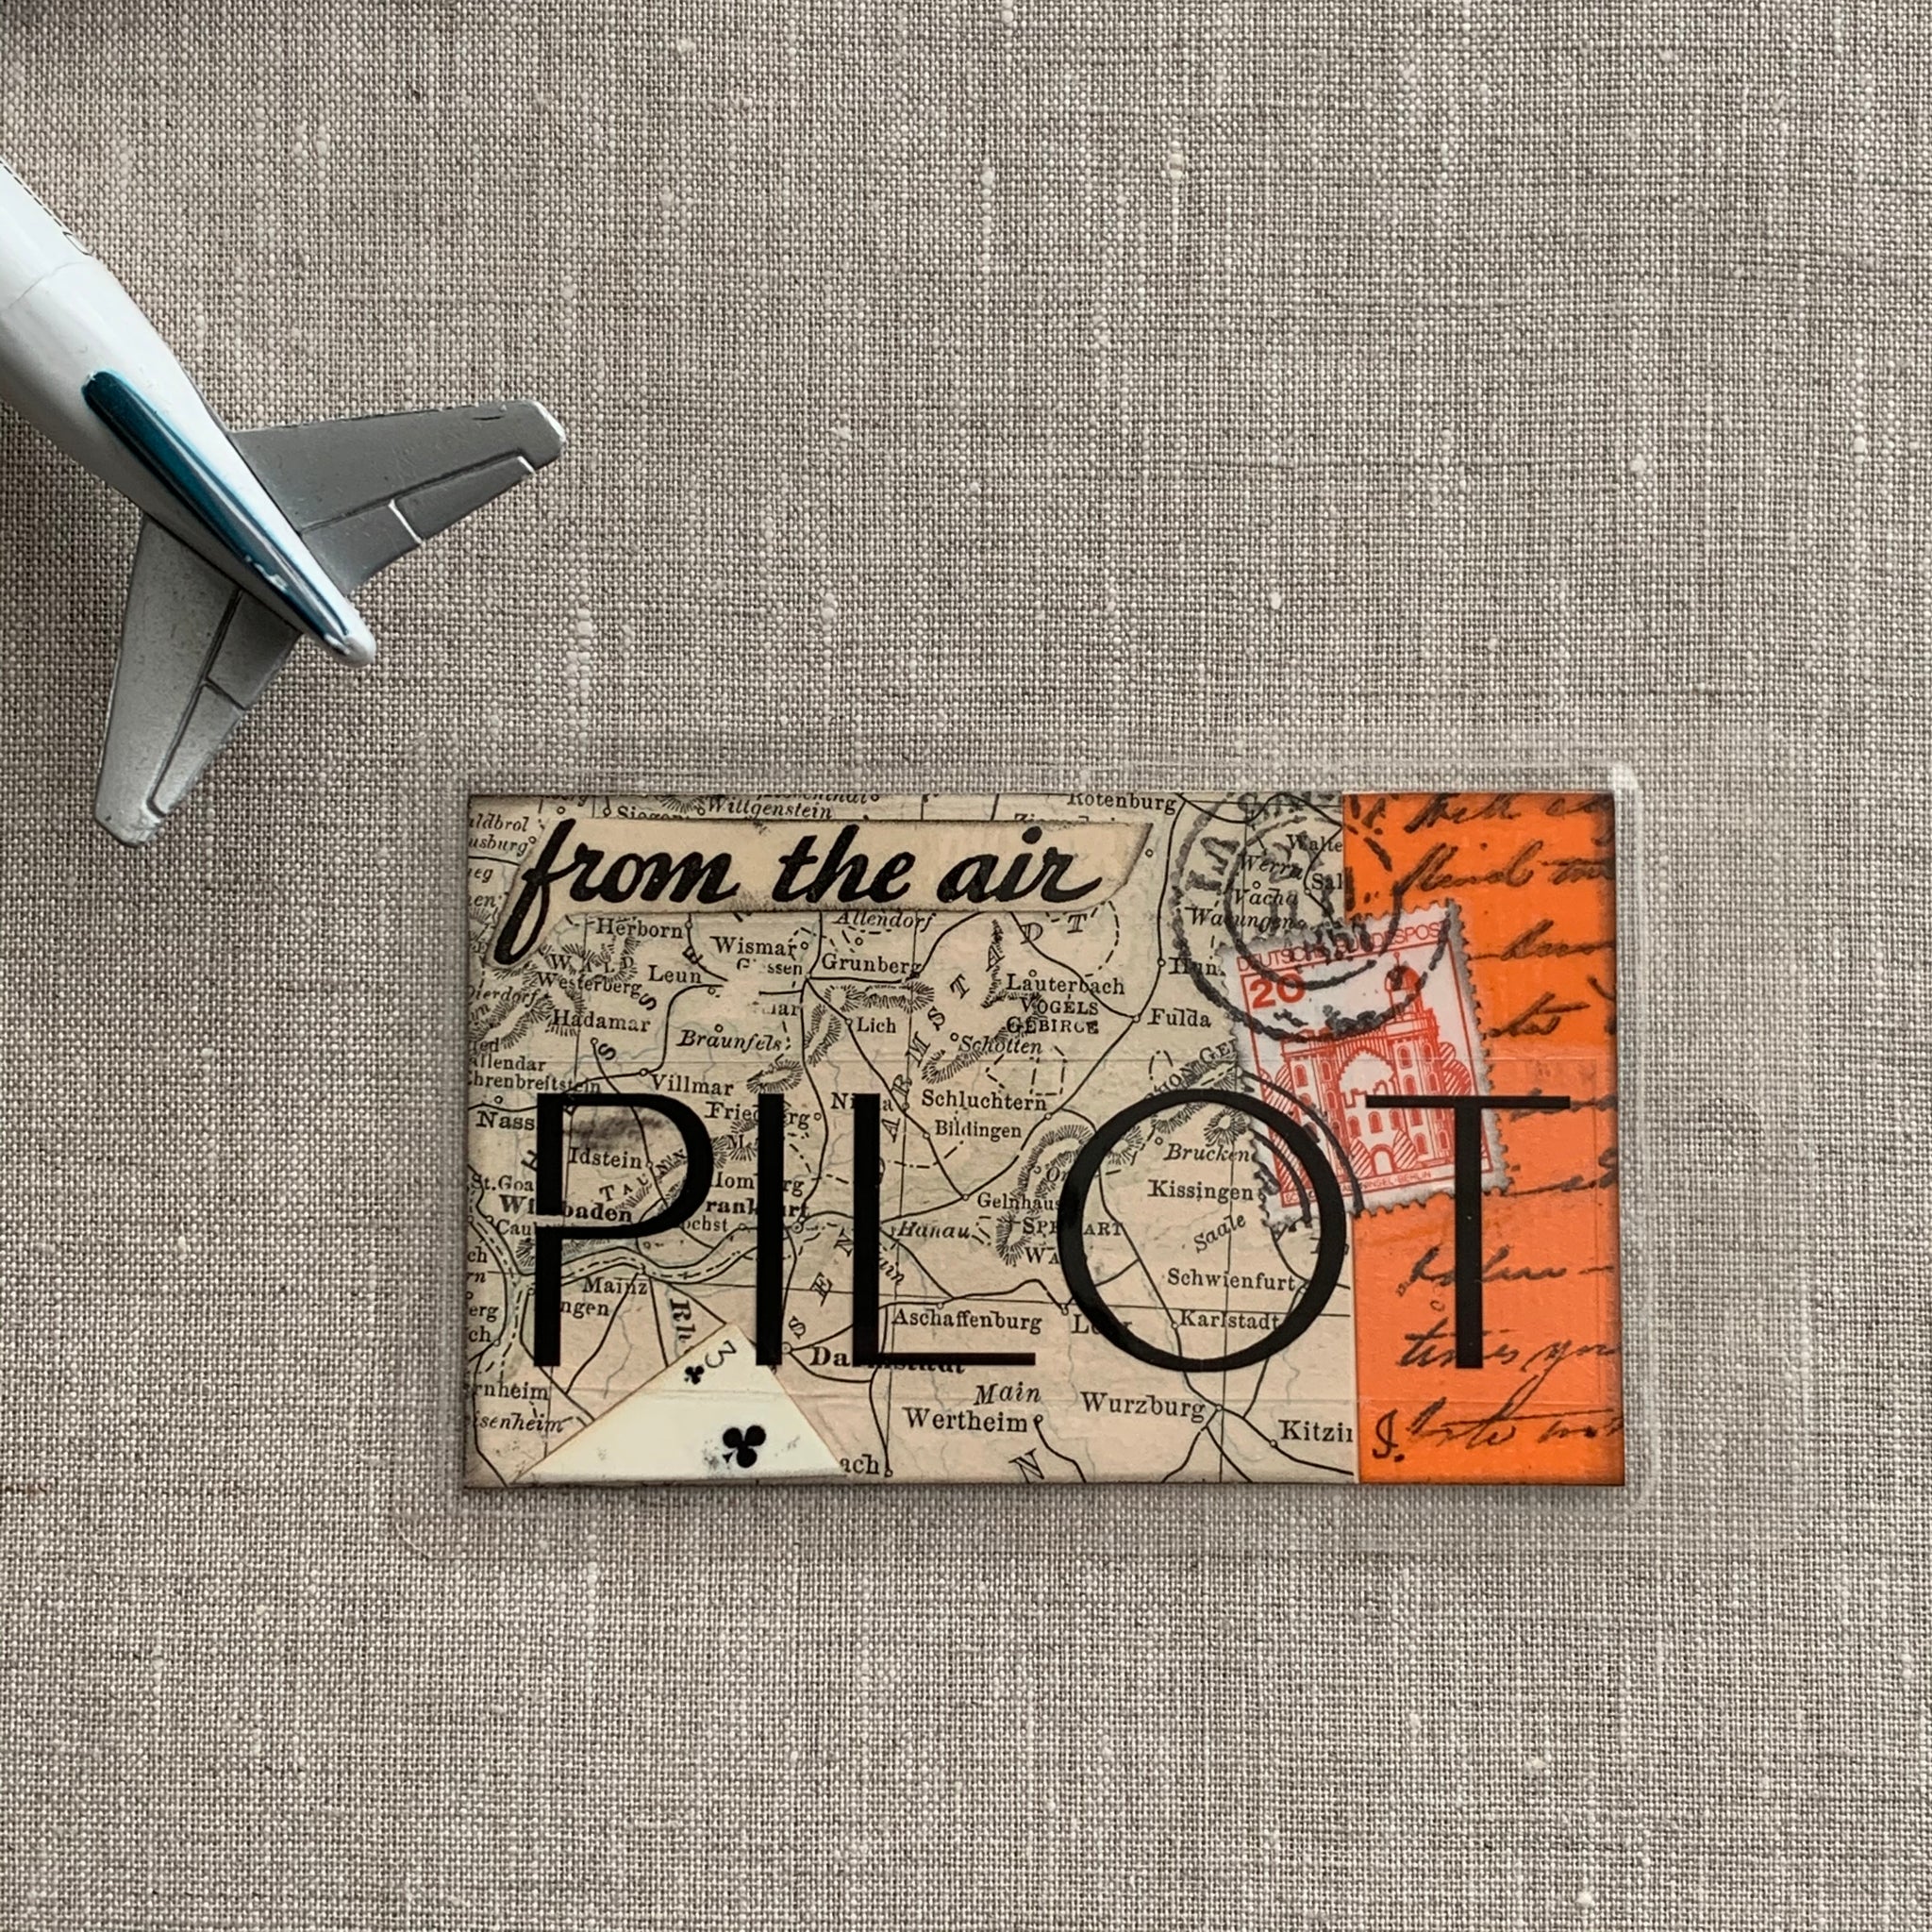 Handcrafted Luggage Tag: Pilot / Aviation